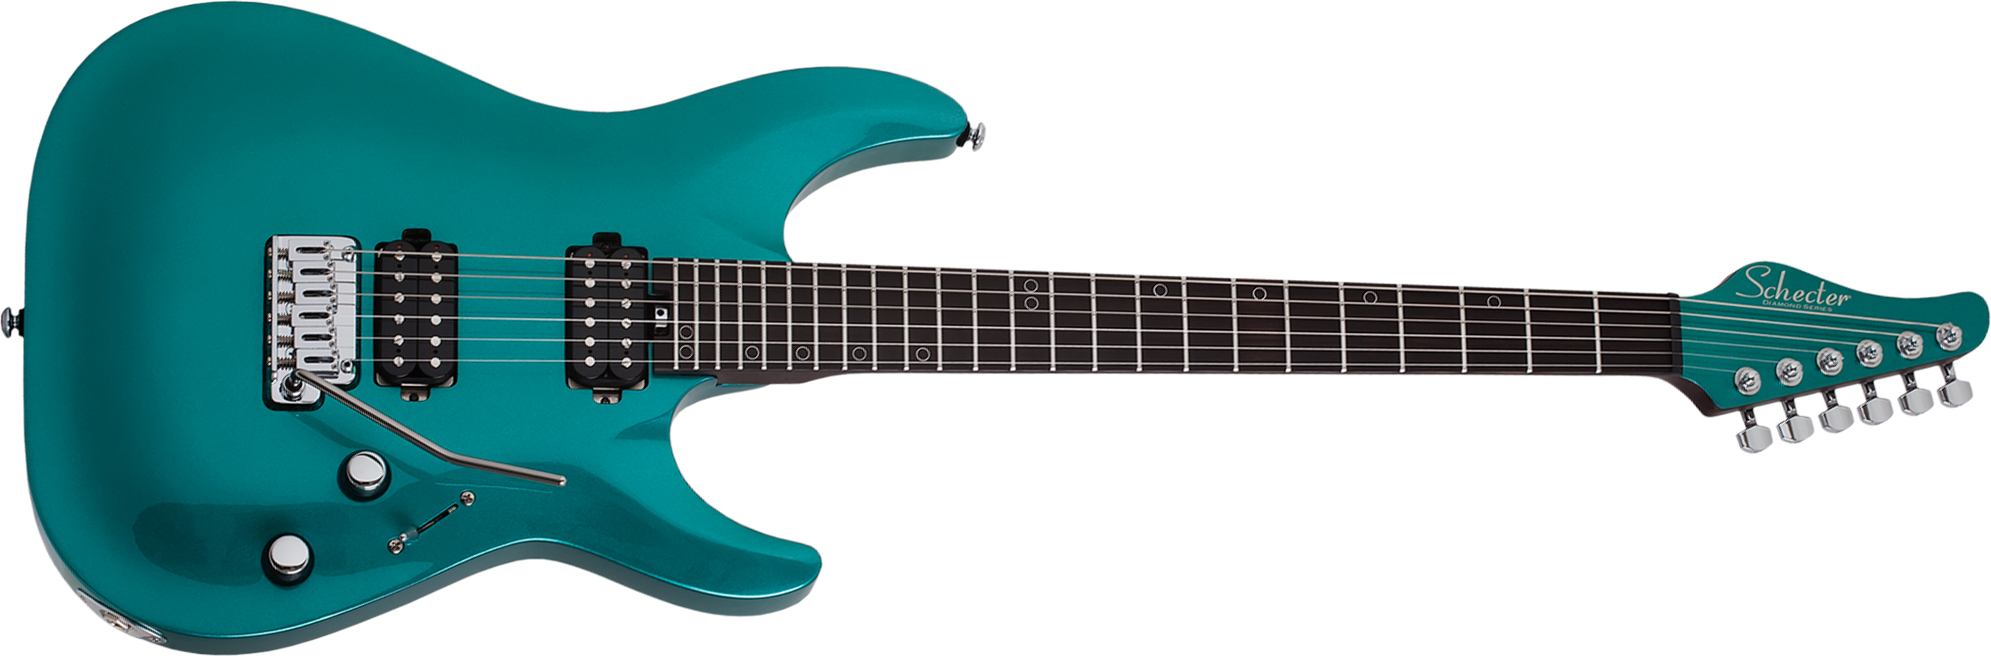 Schecter Aaron Marshall Am-6 Signature 2h Trem Eb - Artic Jade - Str shape electric guitar - Main picture